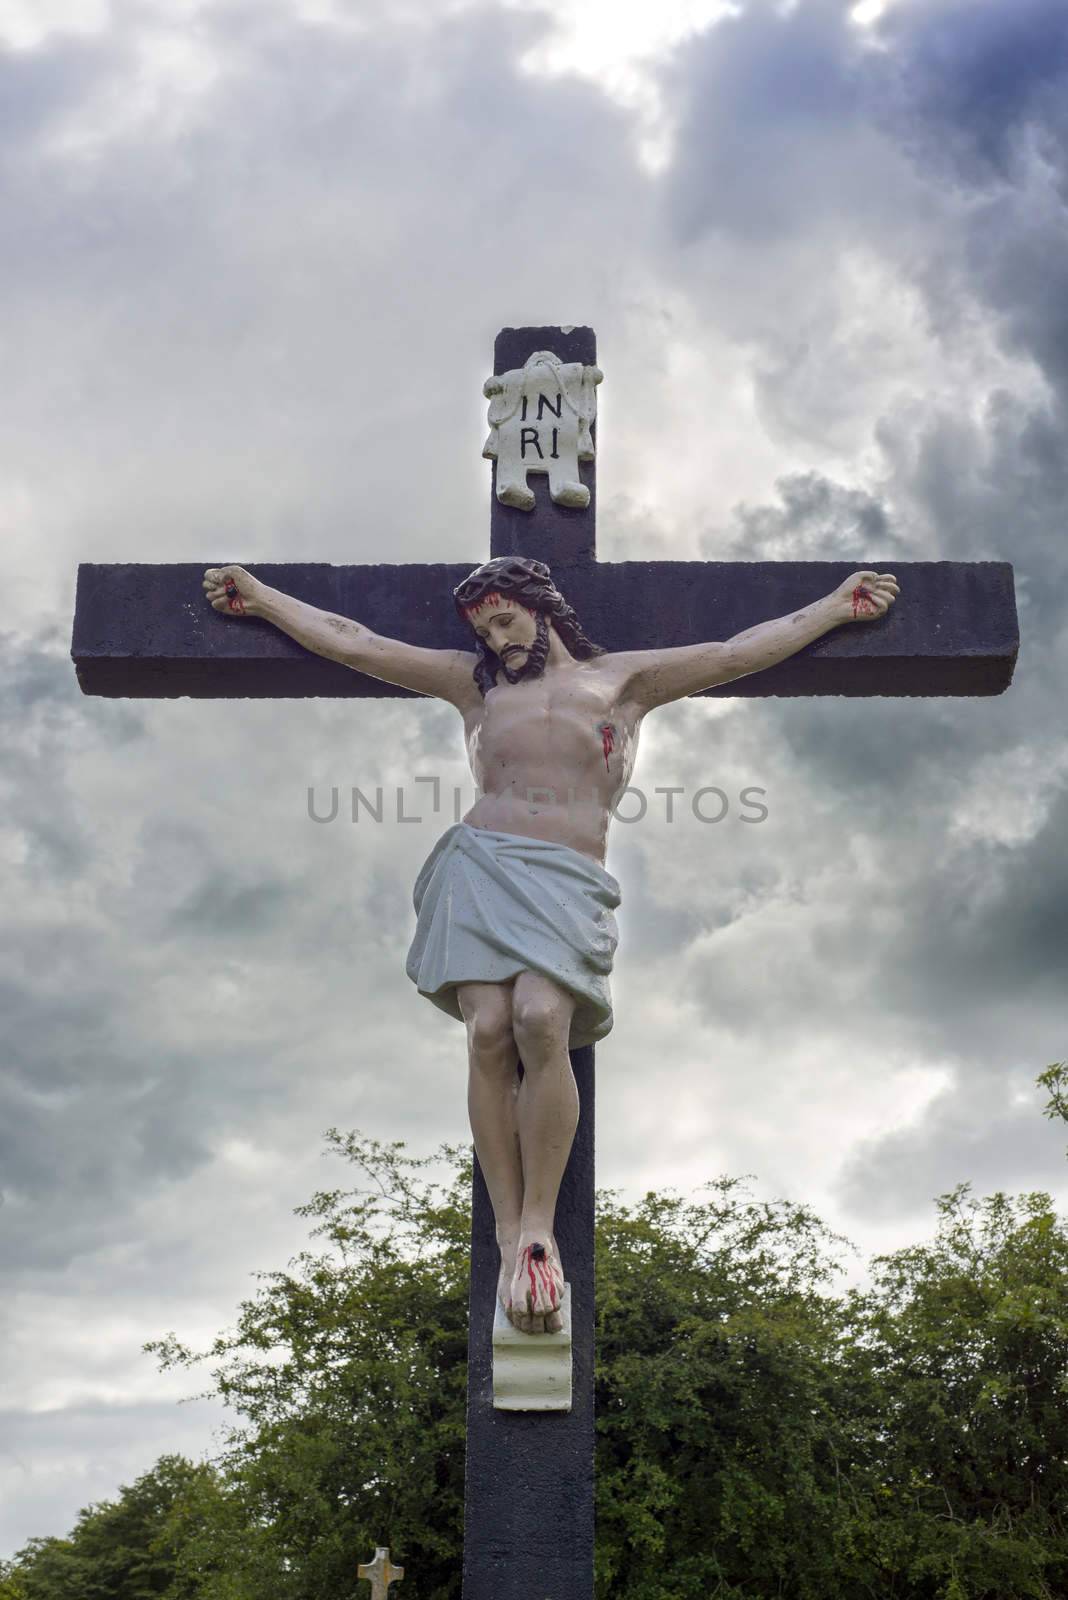 large crucifix in a graveyard by morrbyte